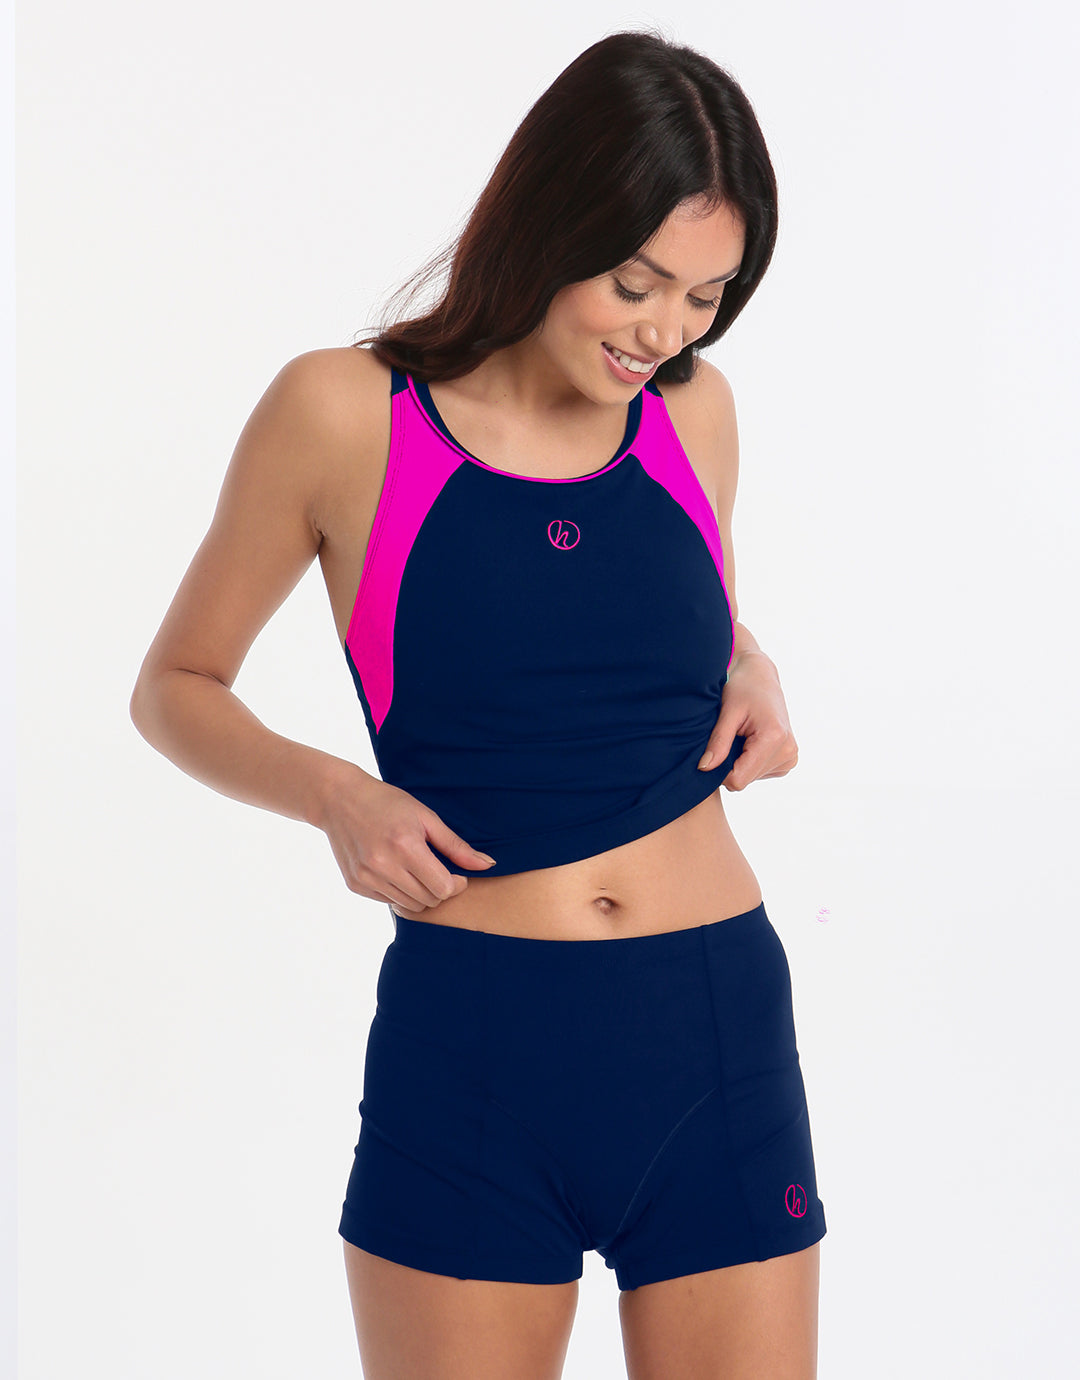 Halocline Sport Racer Tankini Top - Navy and Pink